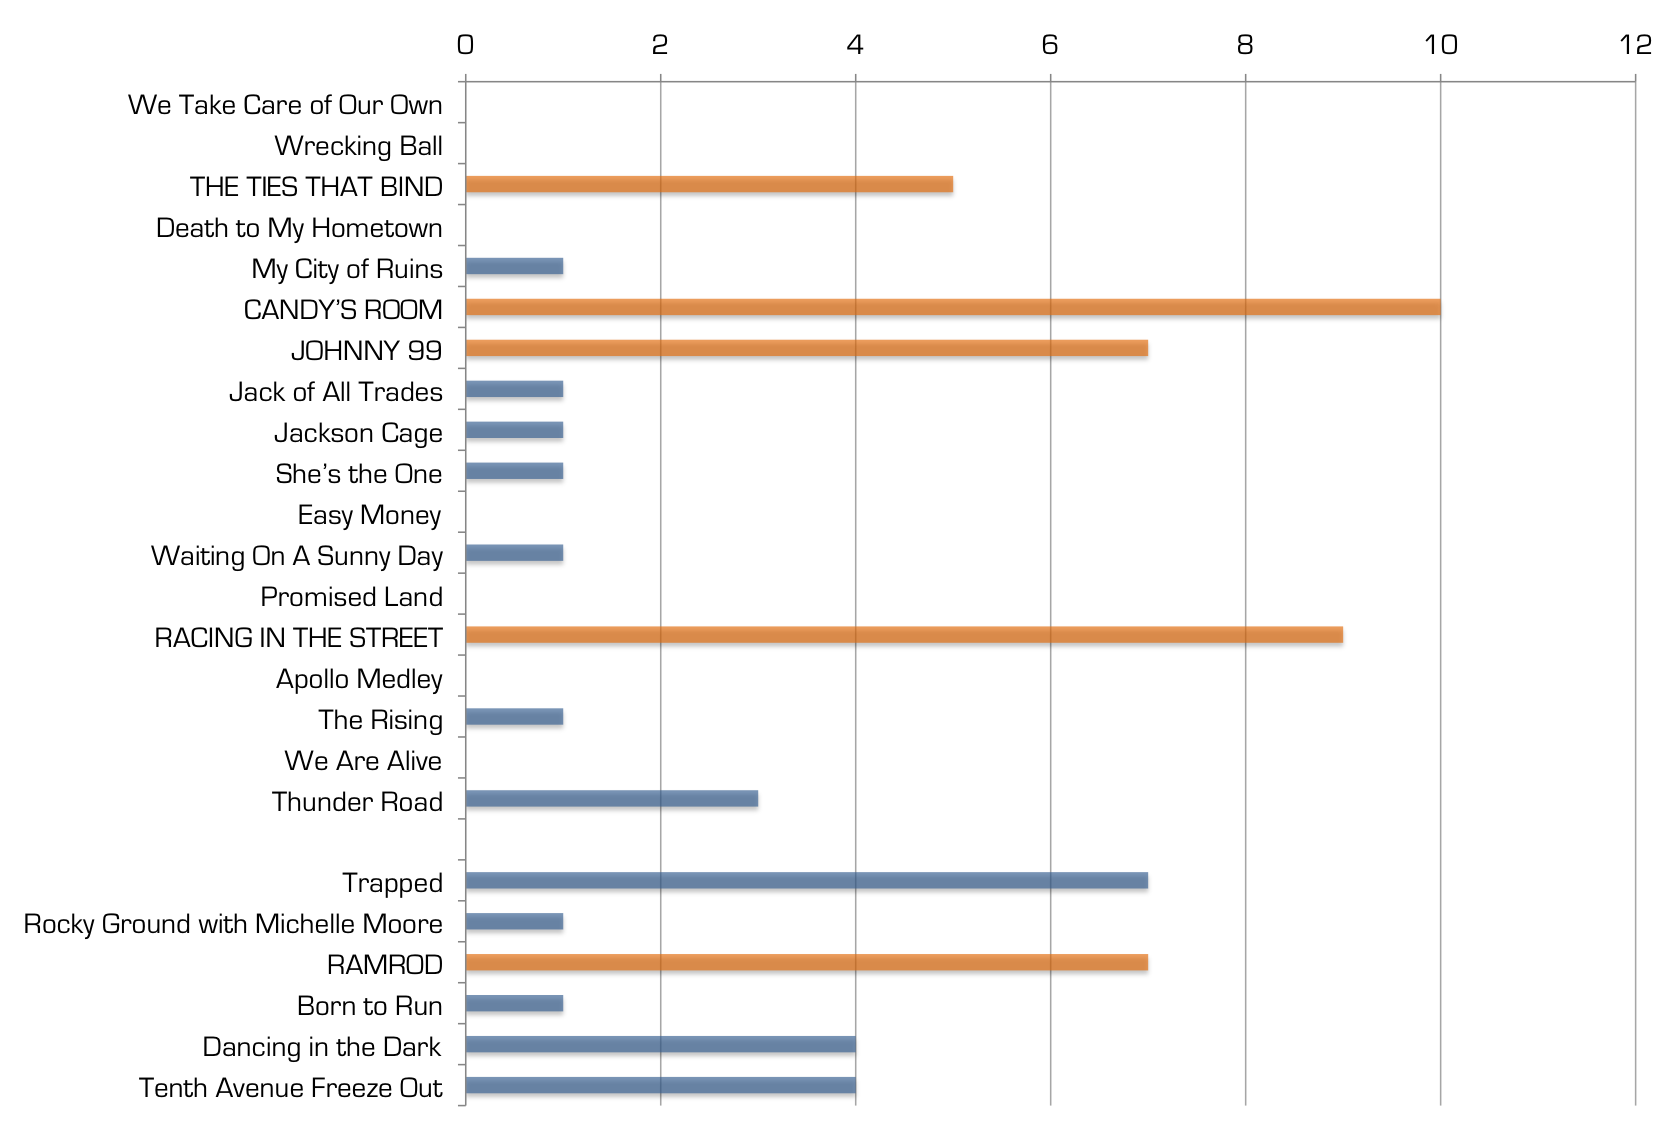 Bar chart listing the set list, tour premieres, and how often each song was mentioned in the tweets.